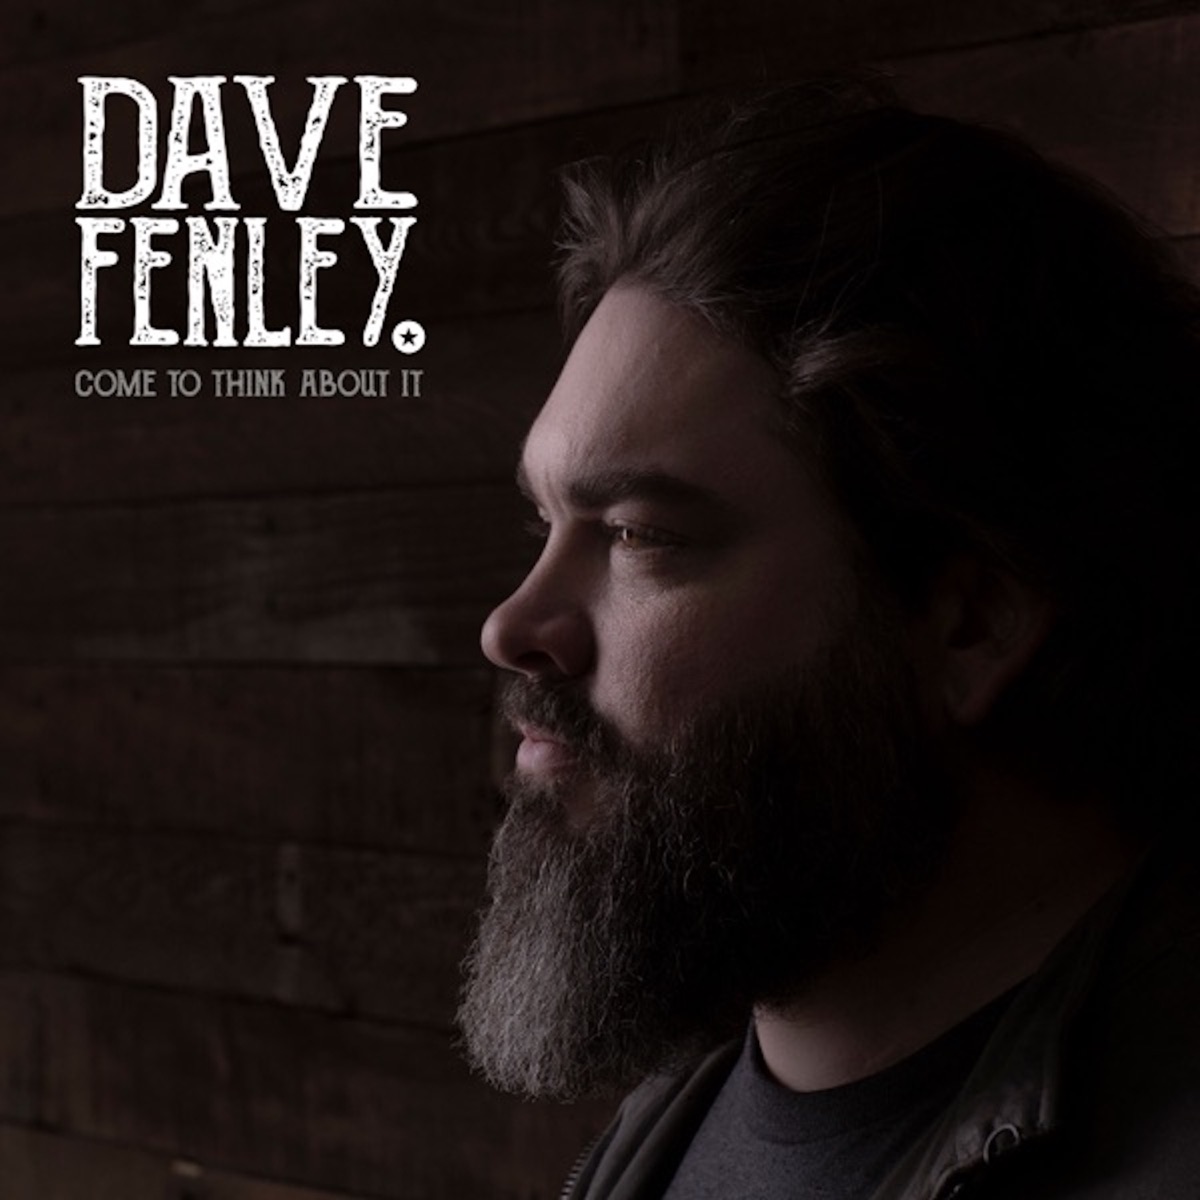 Stuck on You - Song by Dave Fenley - Apple Music